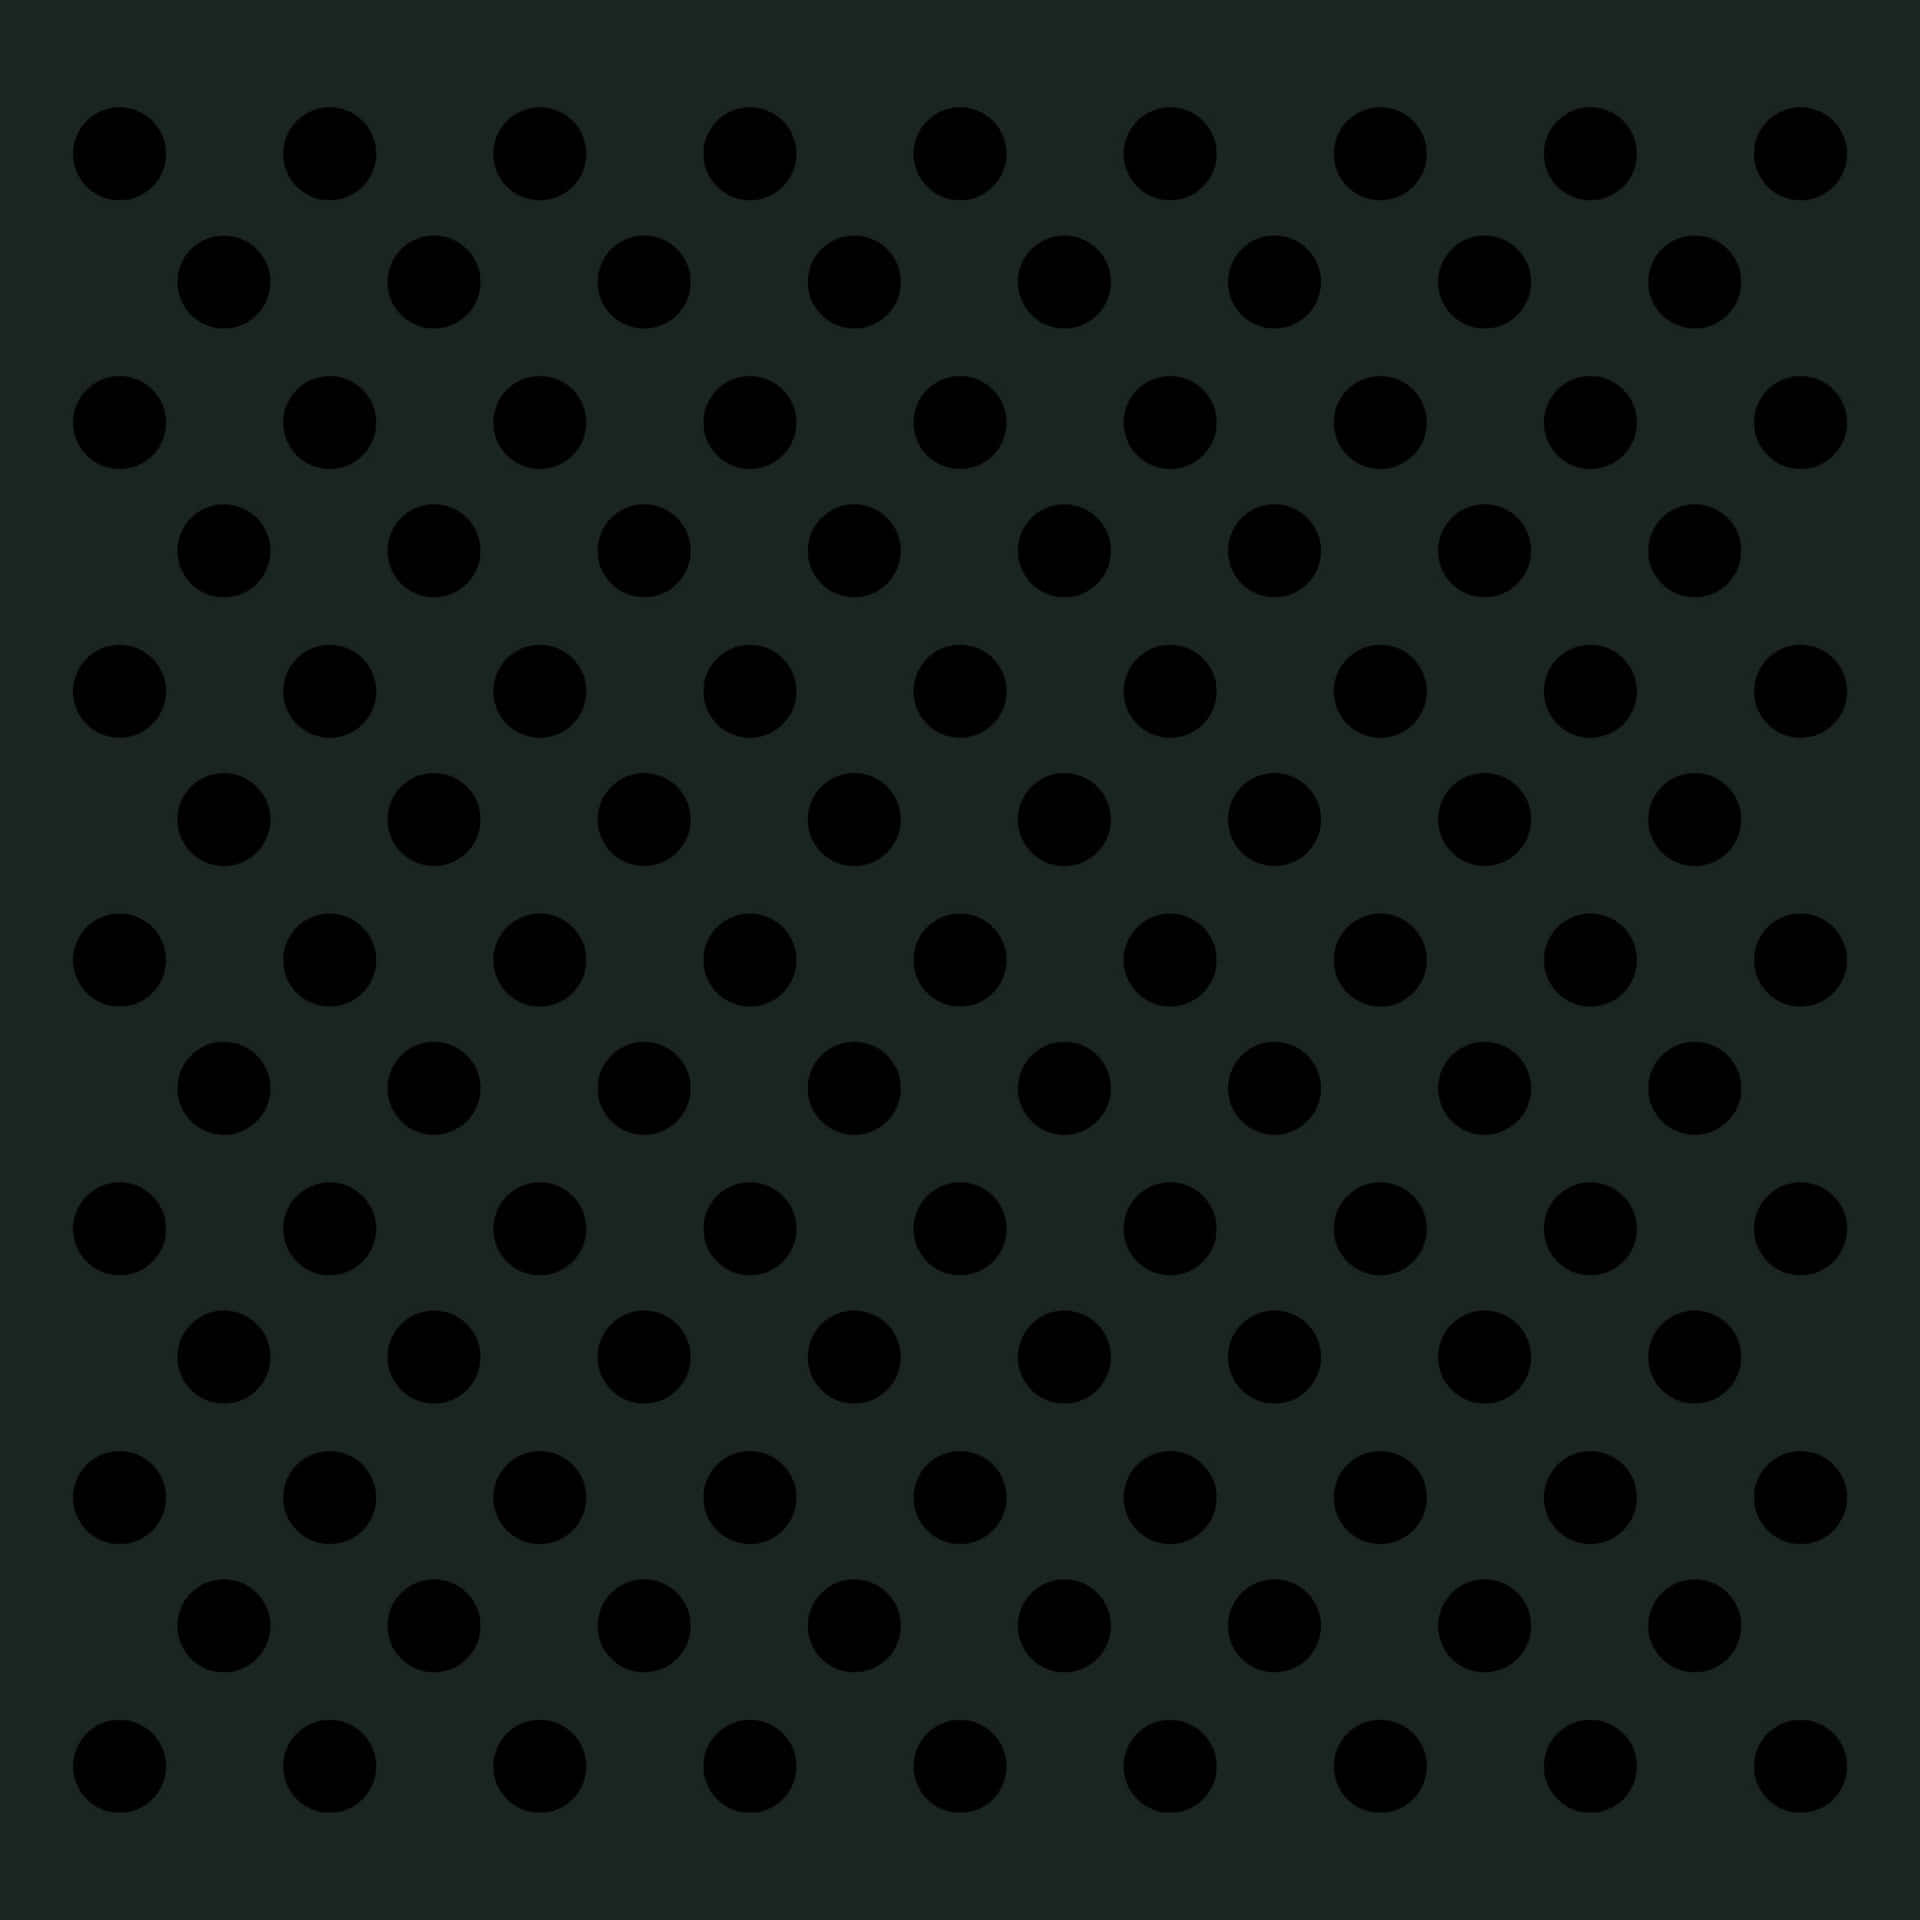 A wallpaper illustrating an array of black dots against a bright pink background. Wallpaper